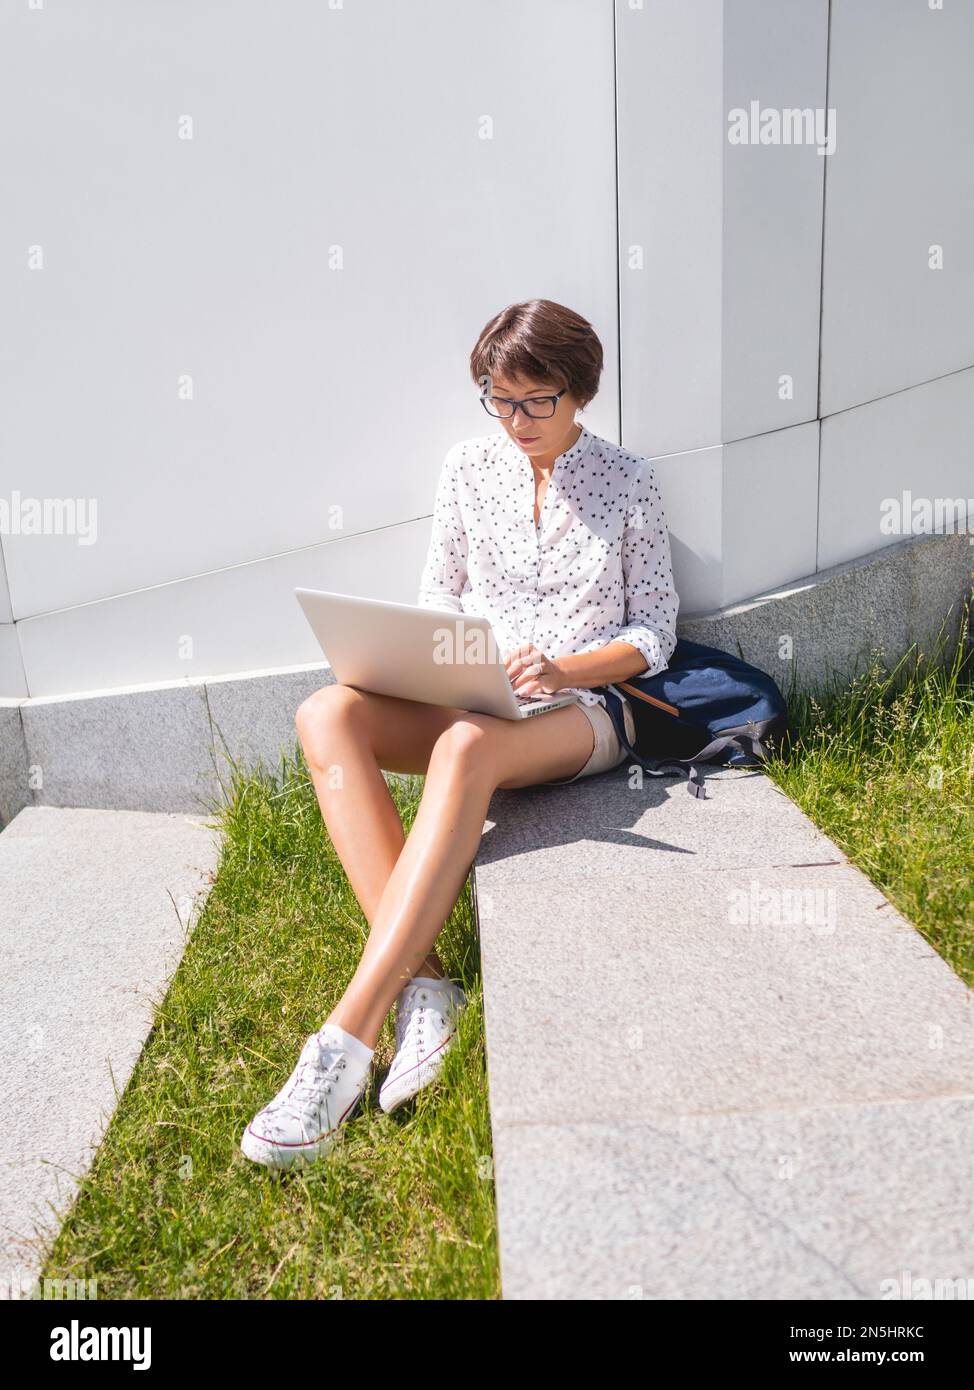 Woman sits with laptop on urban park bench. Freelancer at work. Student learns remotely from outdoors. Modern lifestyle. Summer vibes. Stock Photo